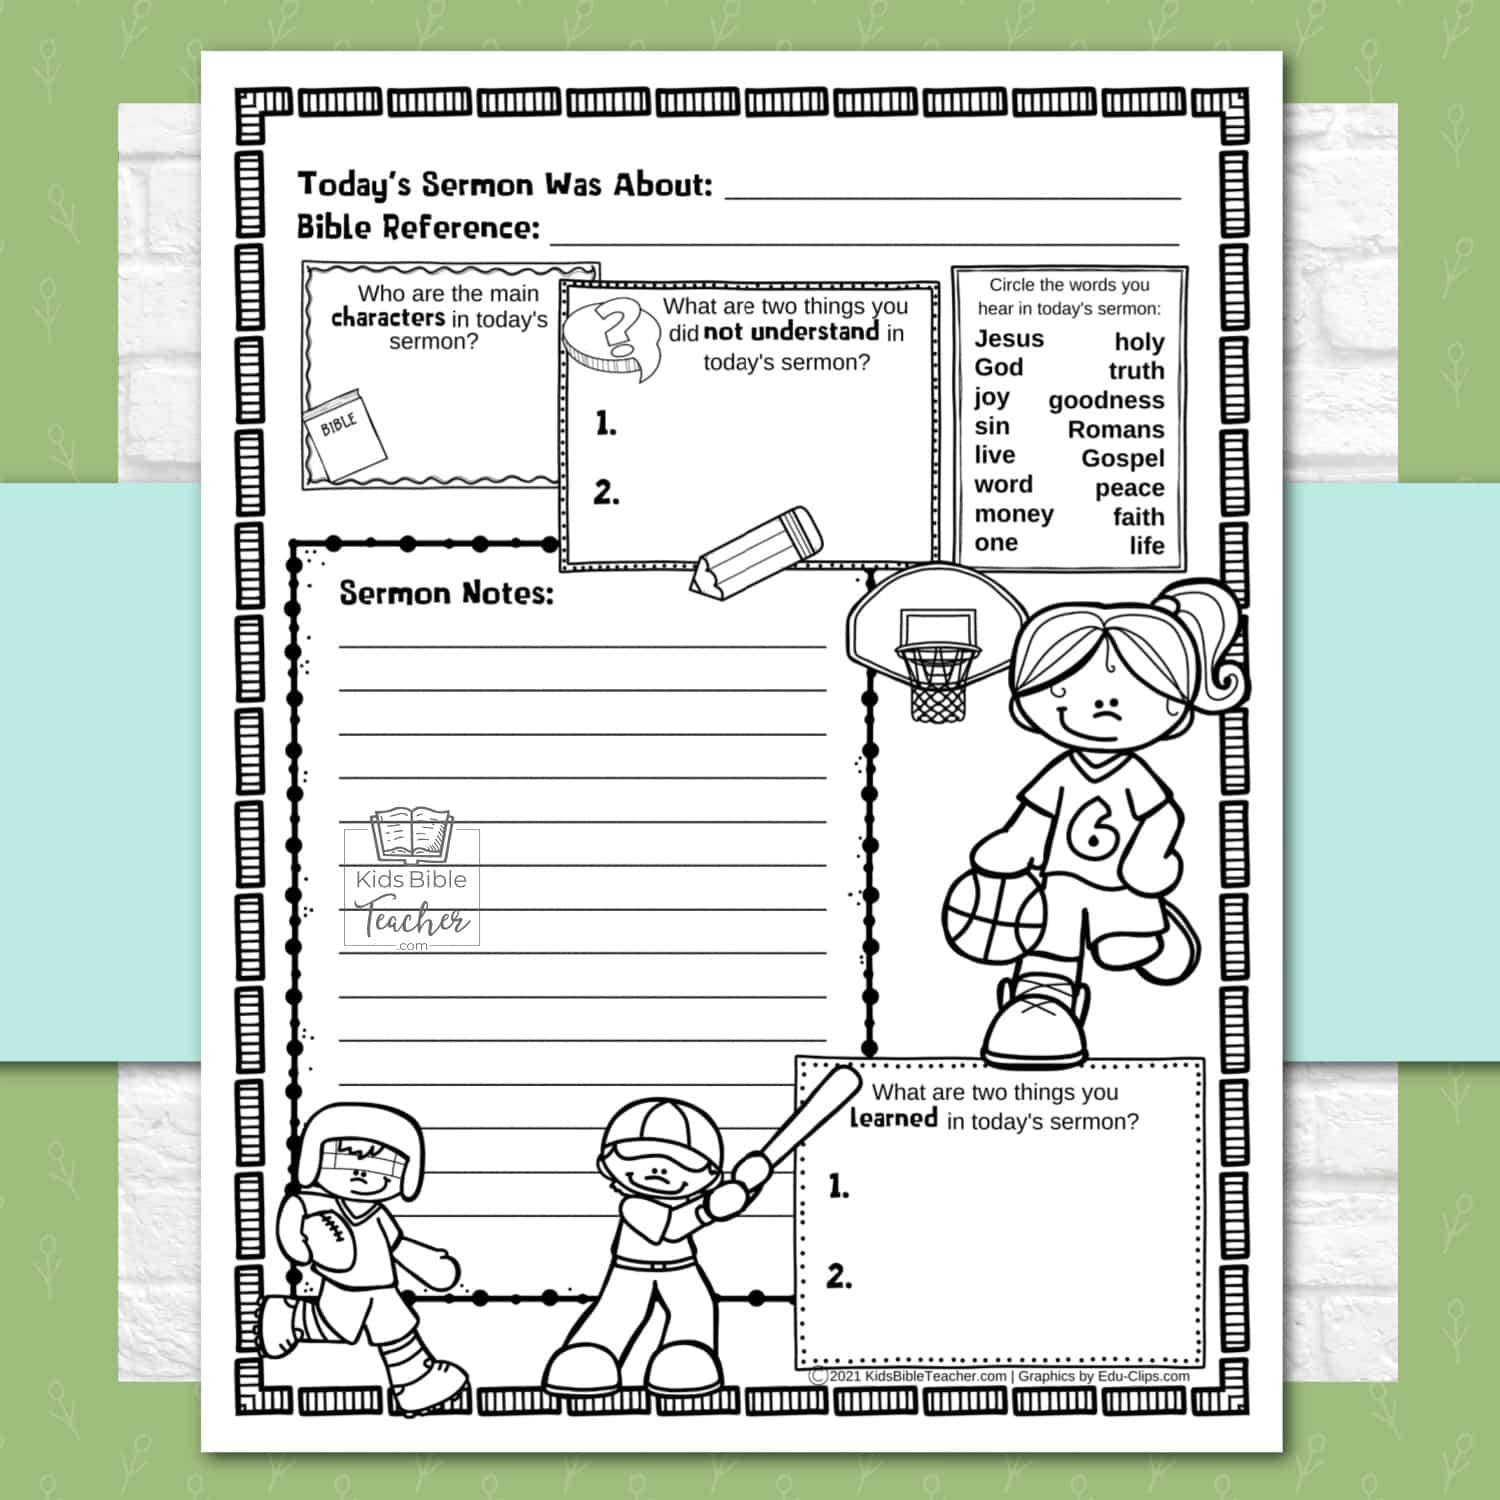 Image of 2nd side of Summer Sermon Notes Page for Kids with section for sermon notes, word bank, and question boxes.